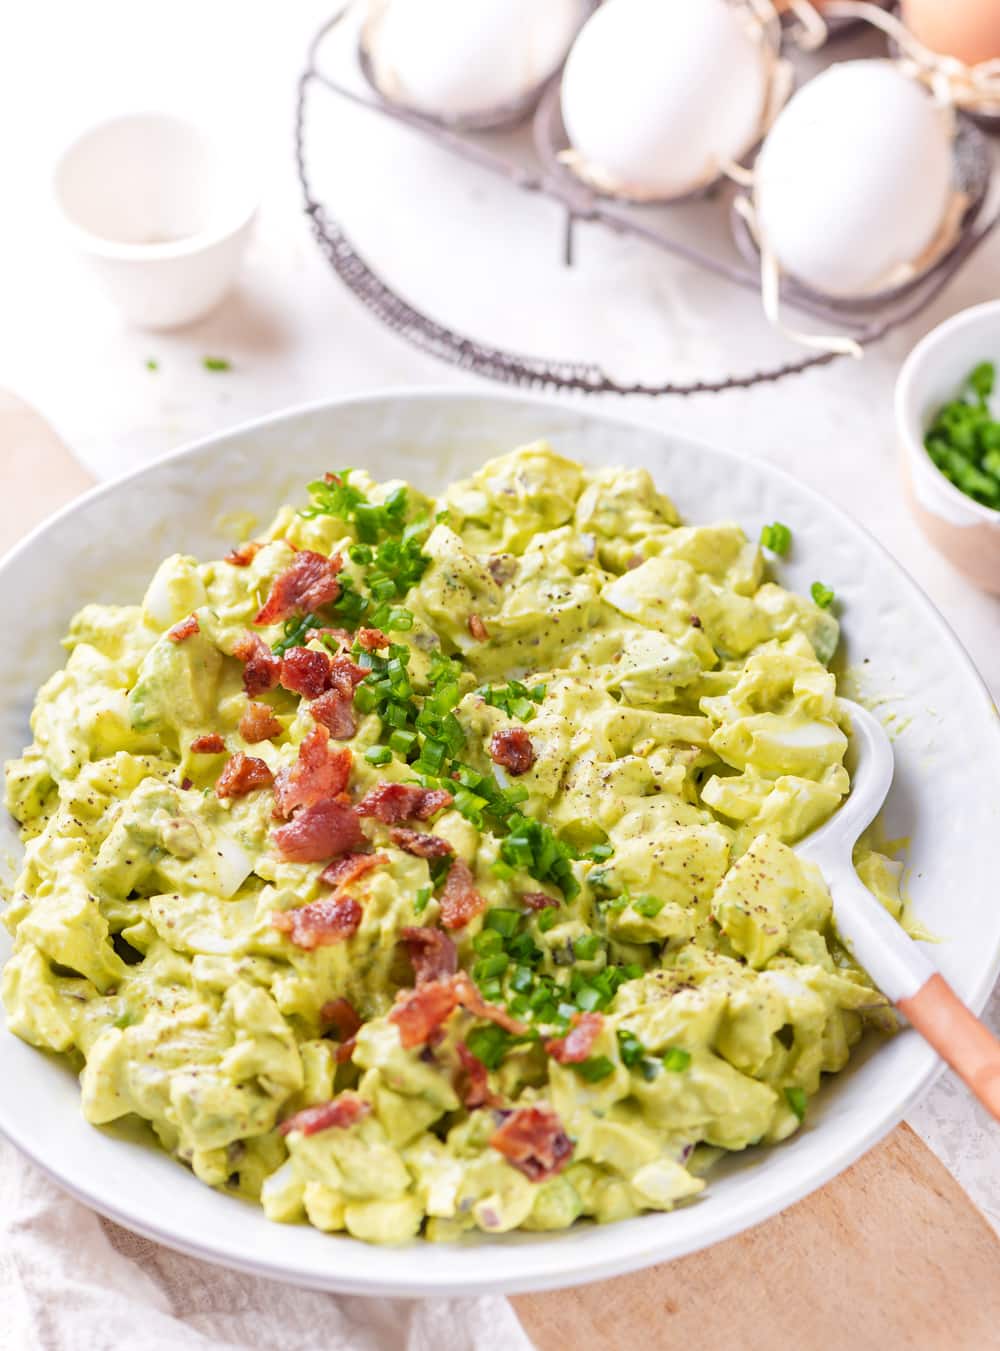 Egg salad in a white bowl topped with bacon and chives.